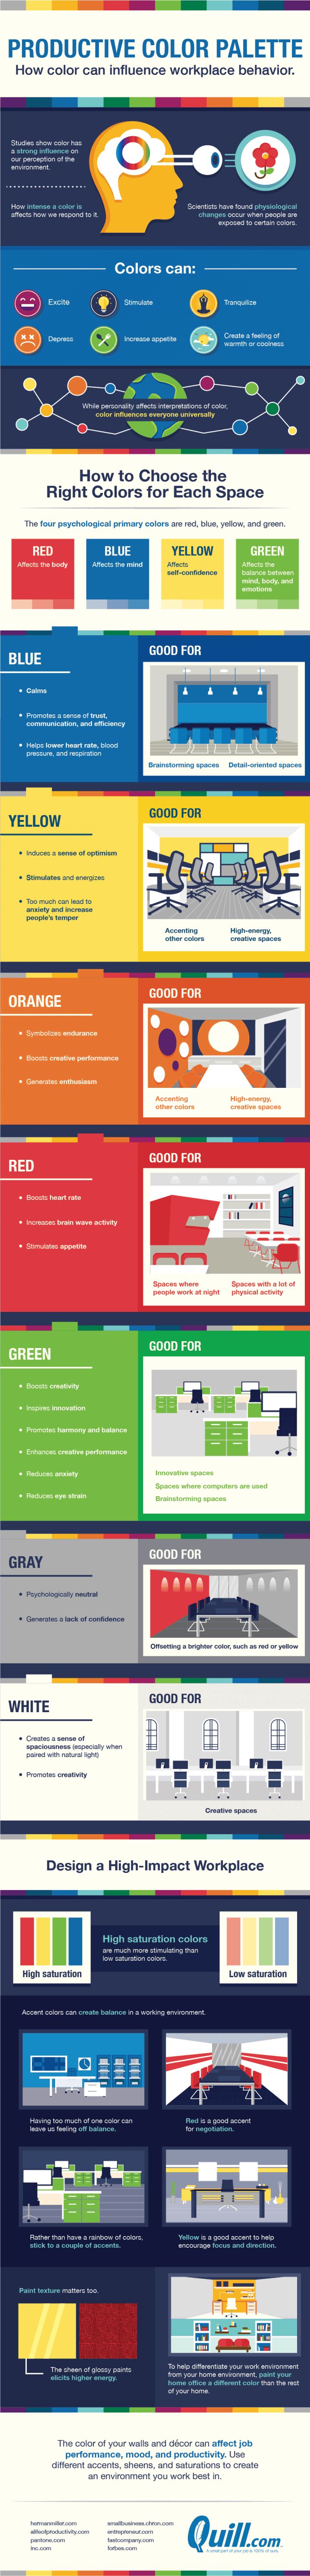 1556276697_999_Psychology-Infographic-The-Best-Colors-For-Productivity-And-Creativity Psychology Infographic : The Best Colors For Productivity And Creativity In Your Workplace